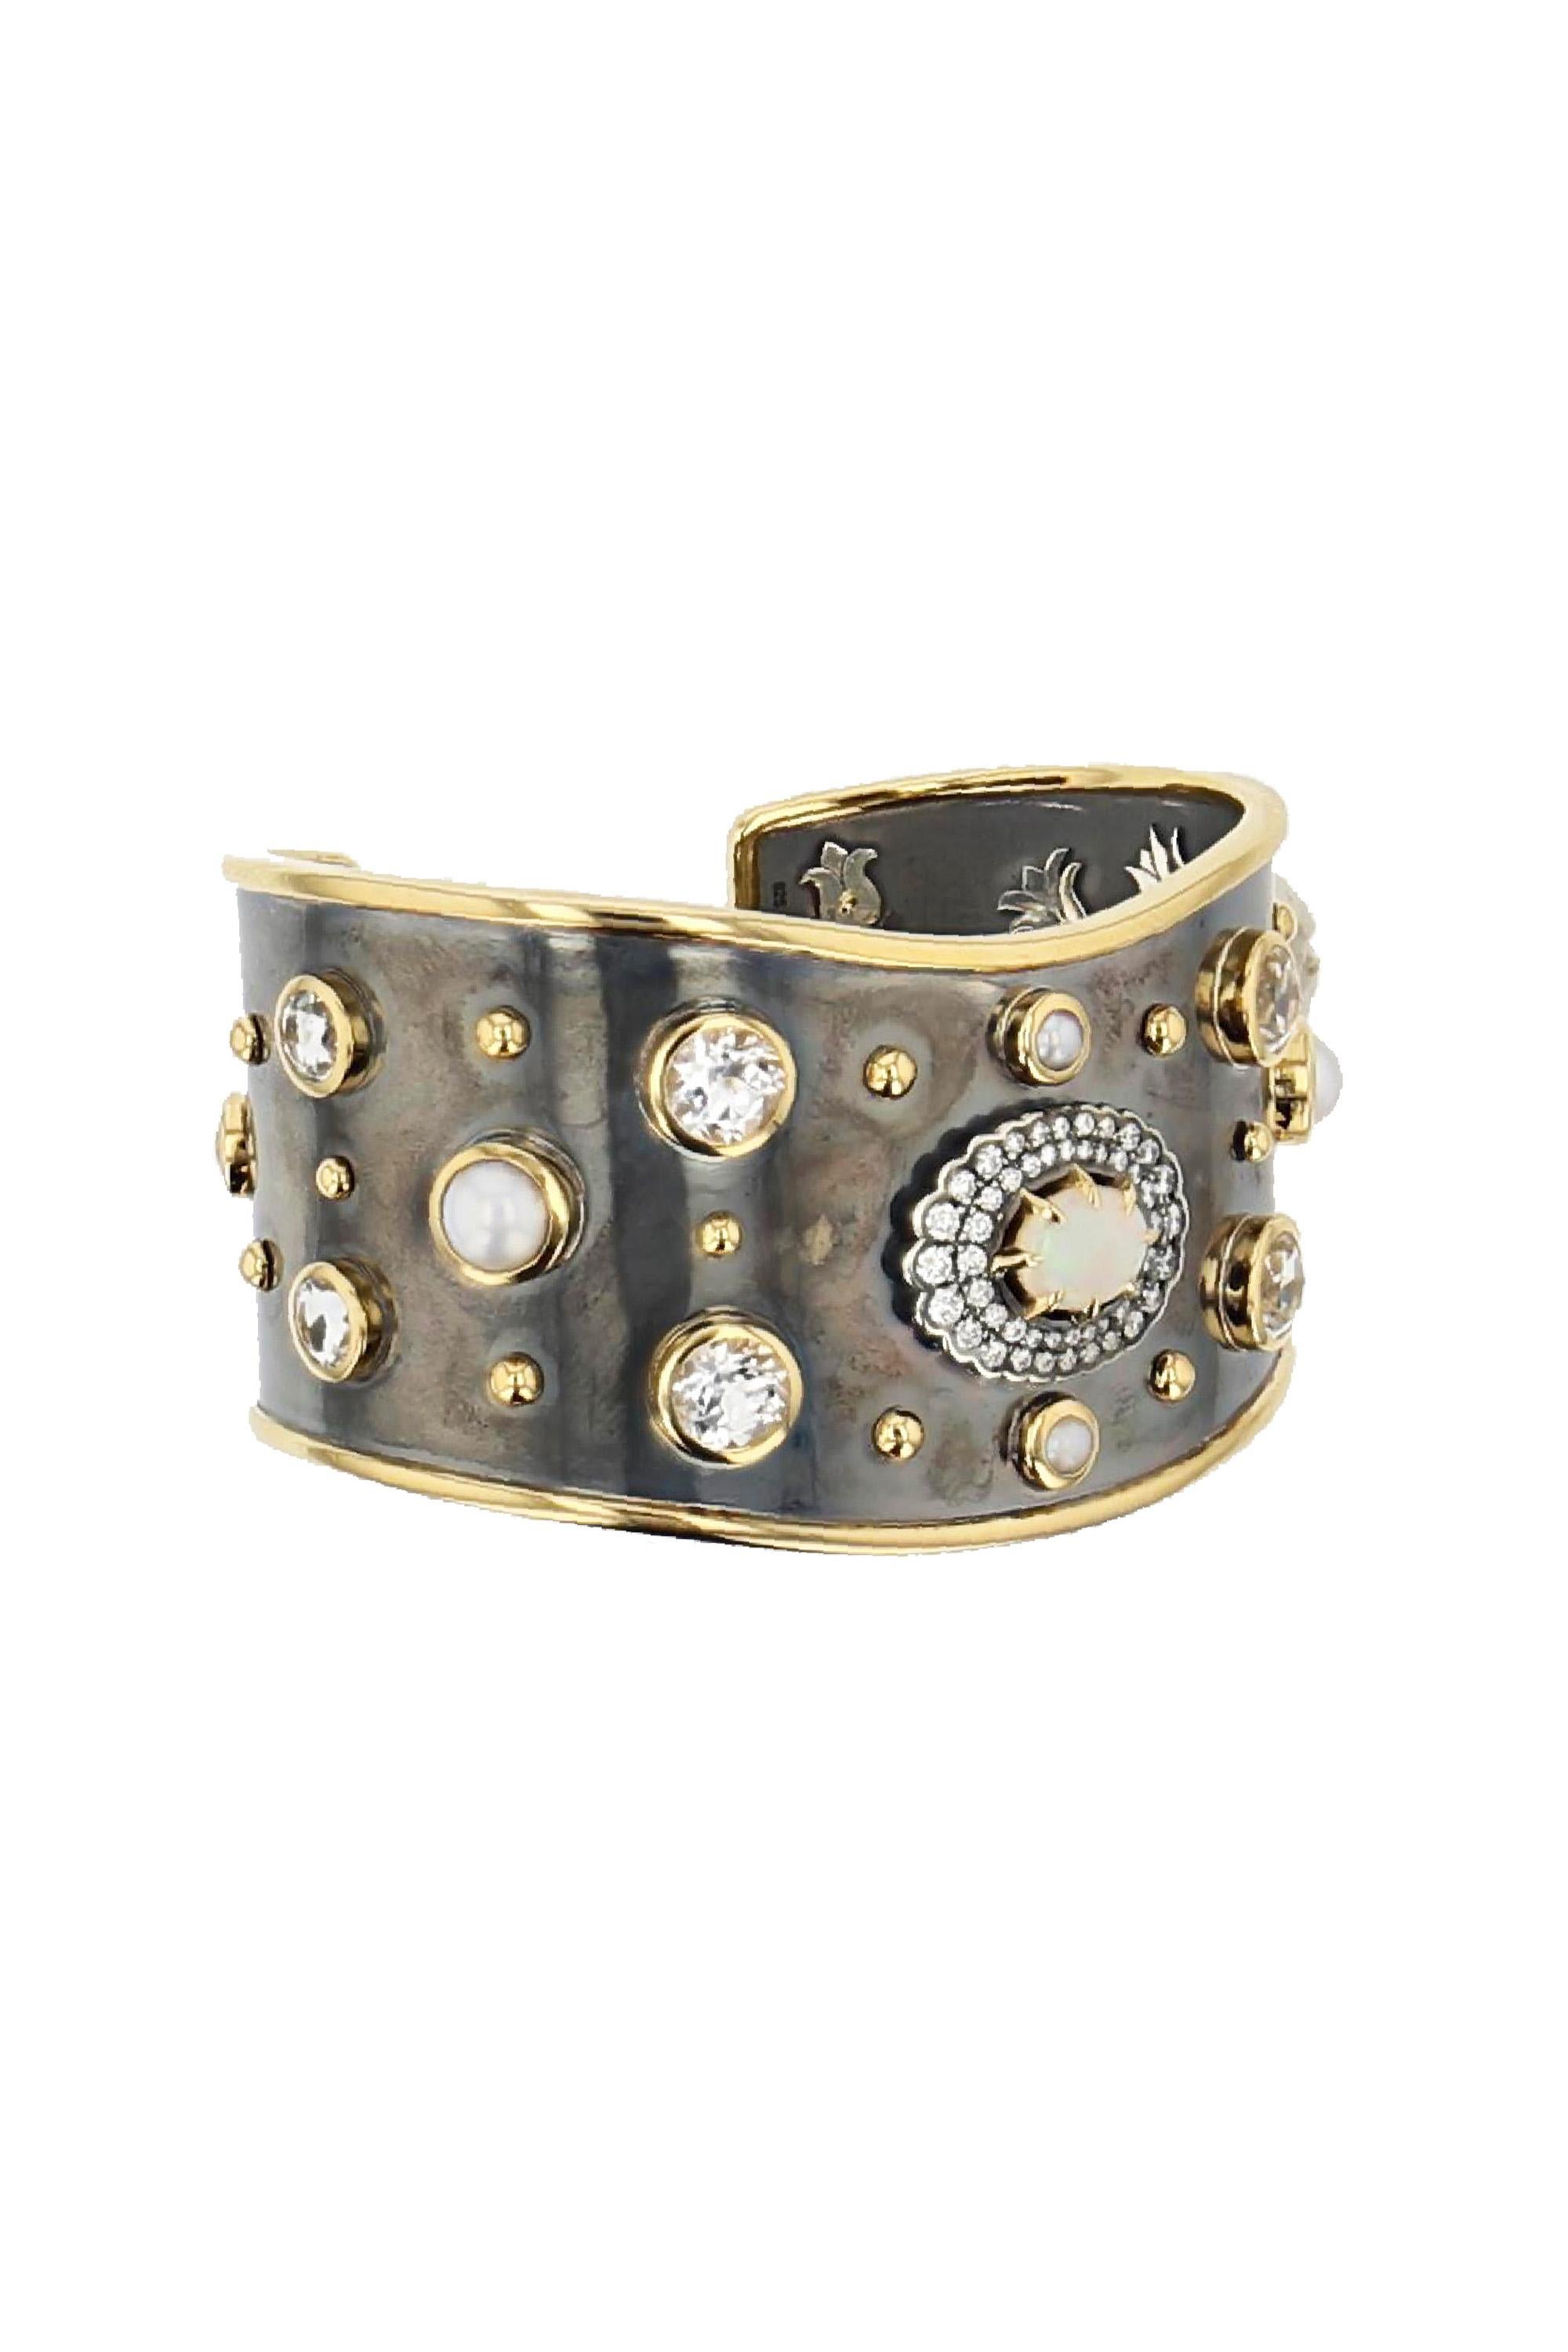 Yellow gold and distressed silver cuff, studded with an opal surrounded by diamonds, akoya pearls and white sapphires.

Details:
Opal, White  Sapphire and Akoya Pearls
Diamond Paving: 0.55 cts
White Sapphire: 4 cts
18k Yellow Gold: 24 g 
Distressed